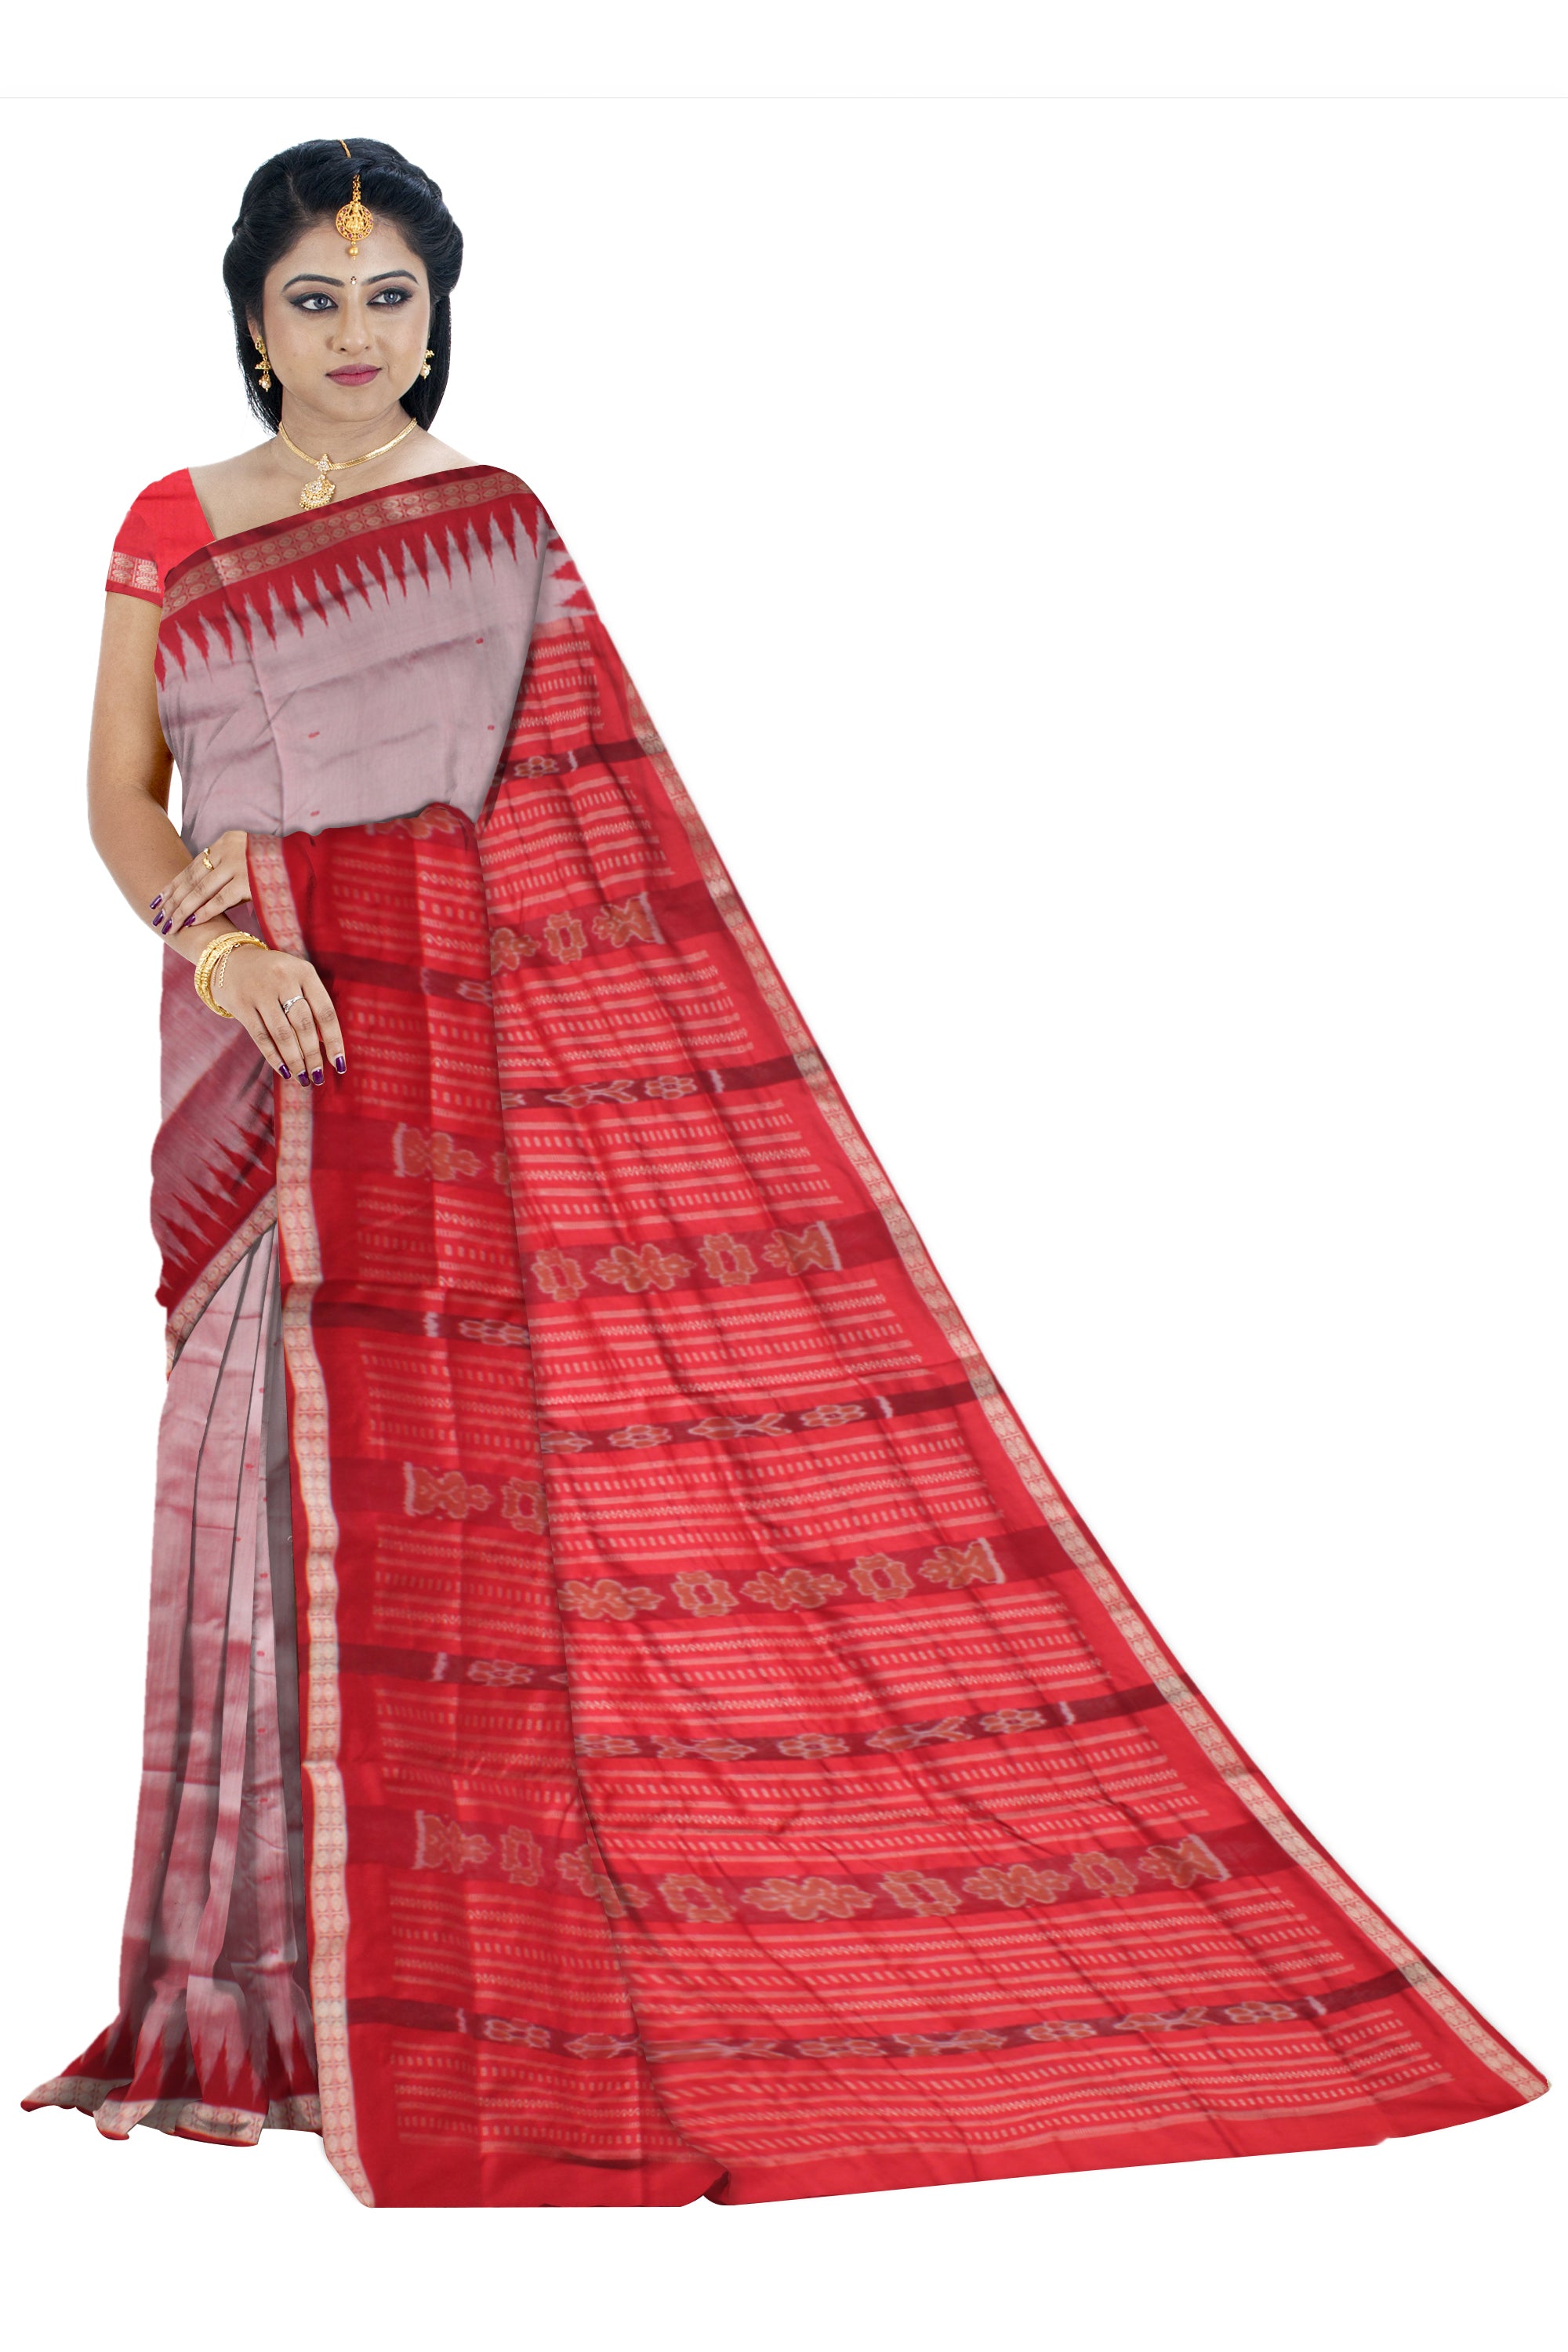 SMALL BORDER PLAIN PATA SAREE IS SILVER AND RED COLOR BASE,COMES WITH MATCHING BLOUSE PIECE. - Koshali Arts & Crafts Enterprise